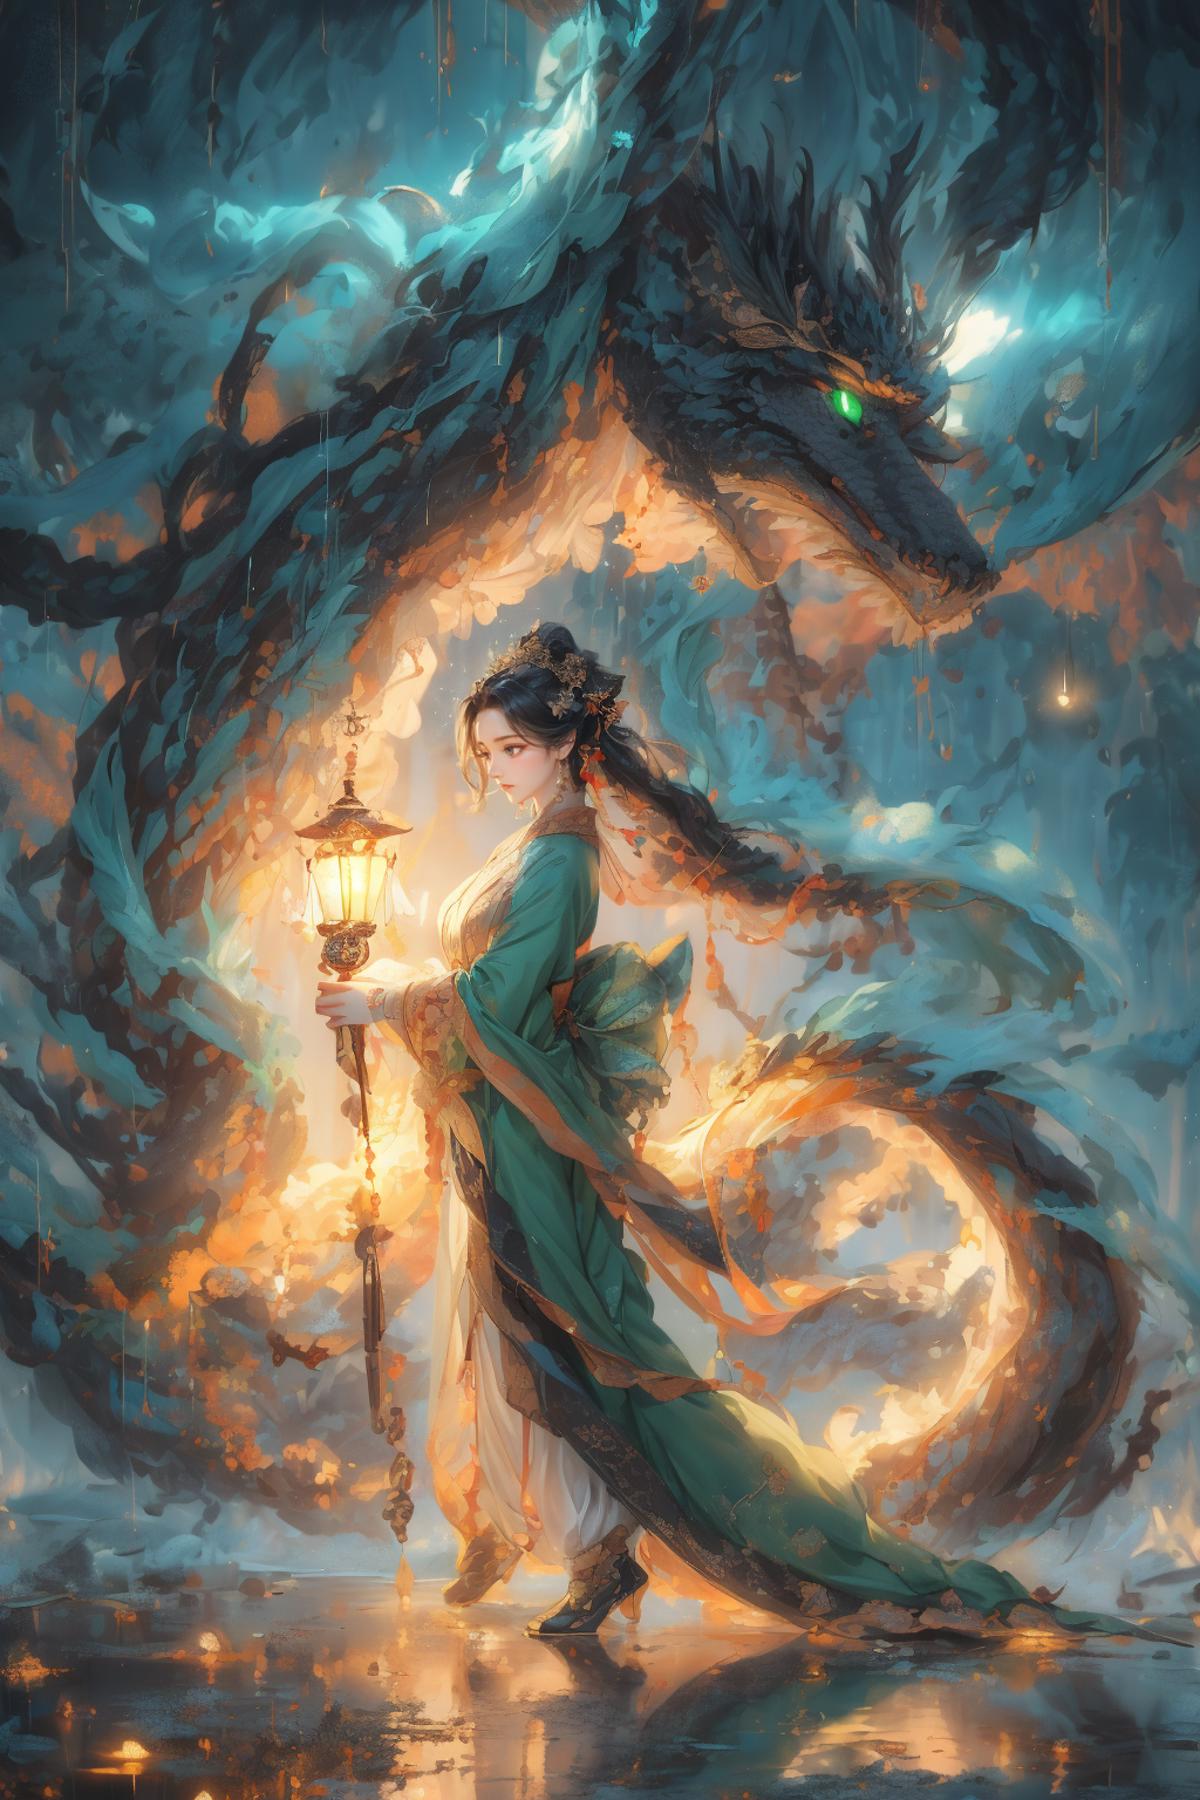 Anime-style art of a woman with a lantern standing next to a dragon.